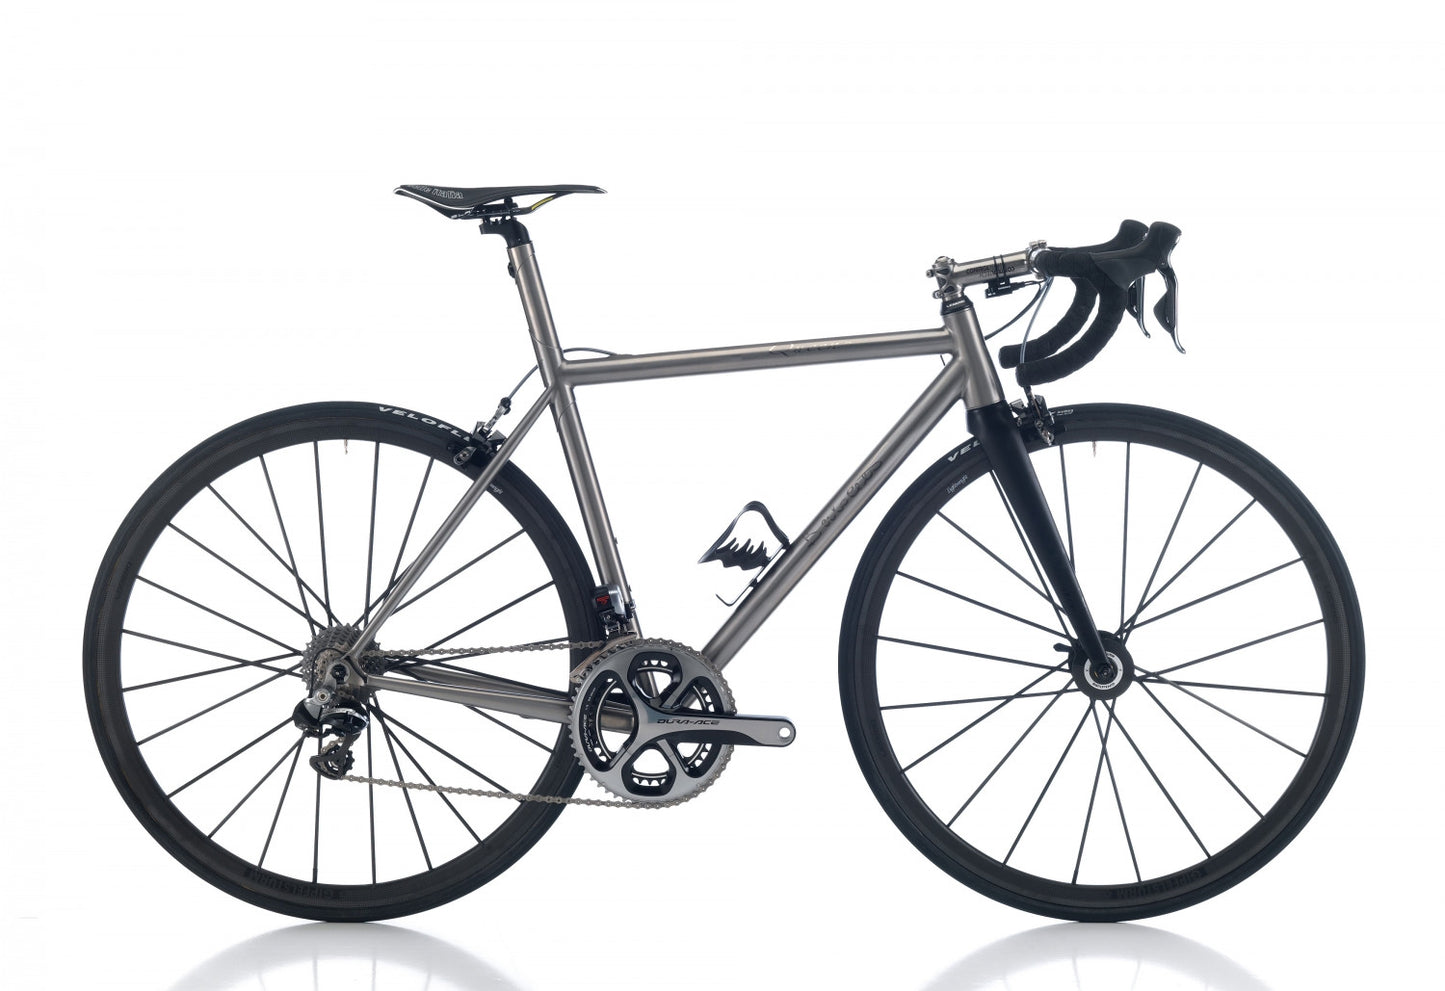 Legend by Marco Bertoletti - 'Queen FTi' Bespoke Built Titanium Bicycle Frame and Carbon Fork